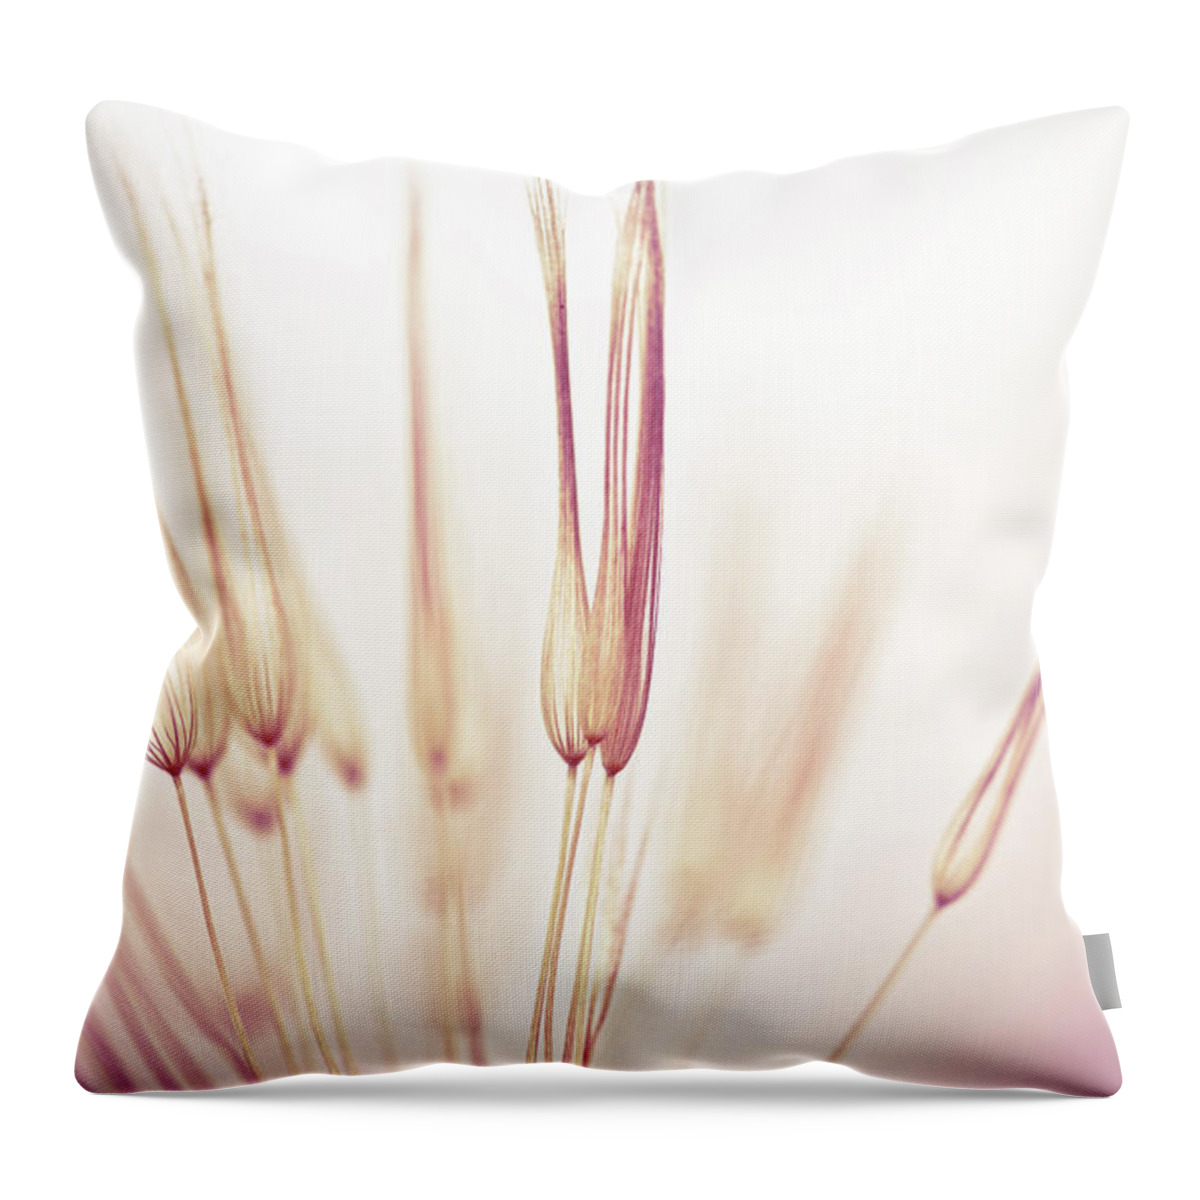 Purple Throw Pillow featuring the photograph Dandelion Seed #3 by Jasmina007